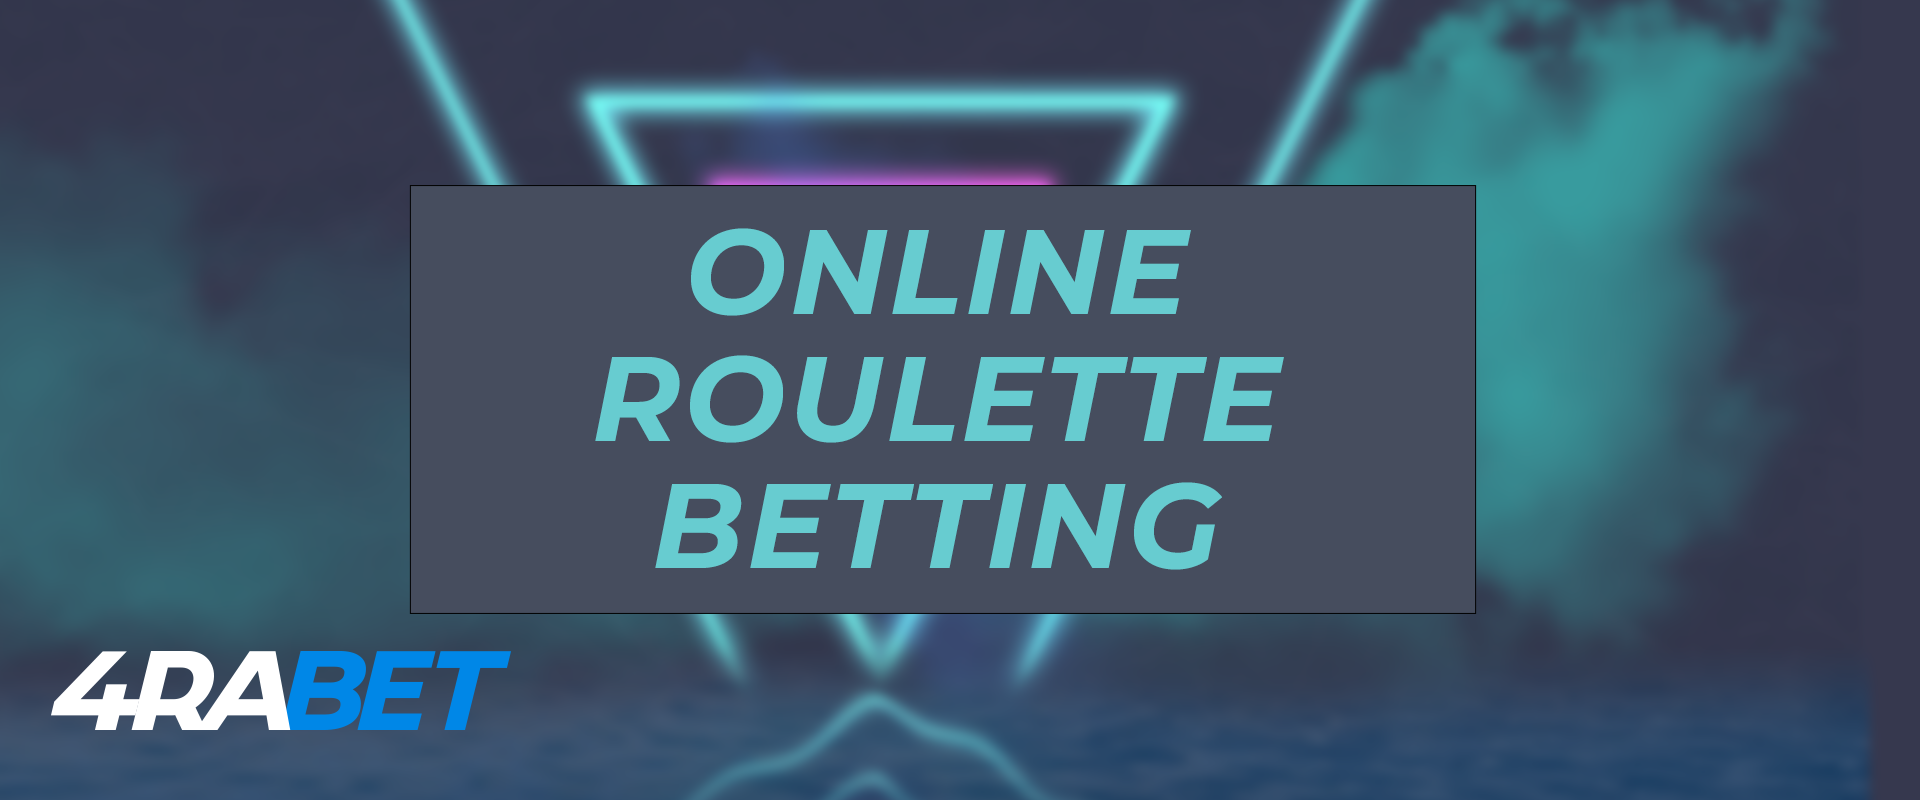 Online Roulette betting at 4rabet